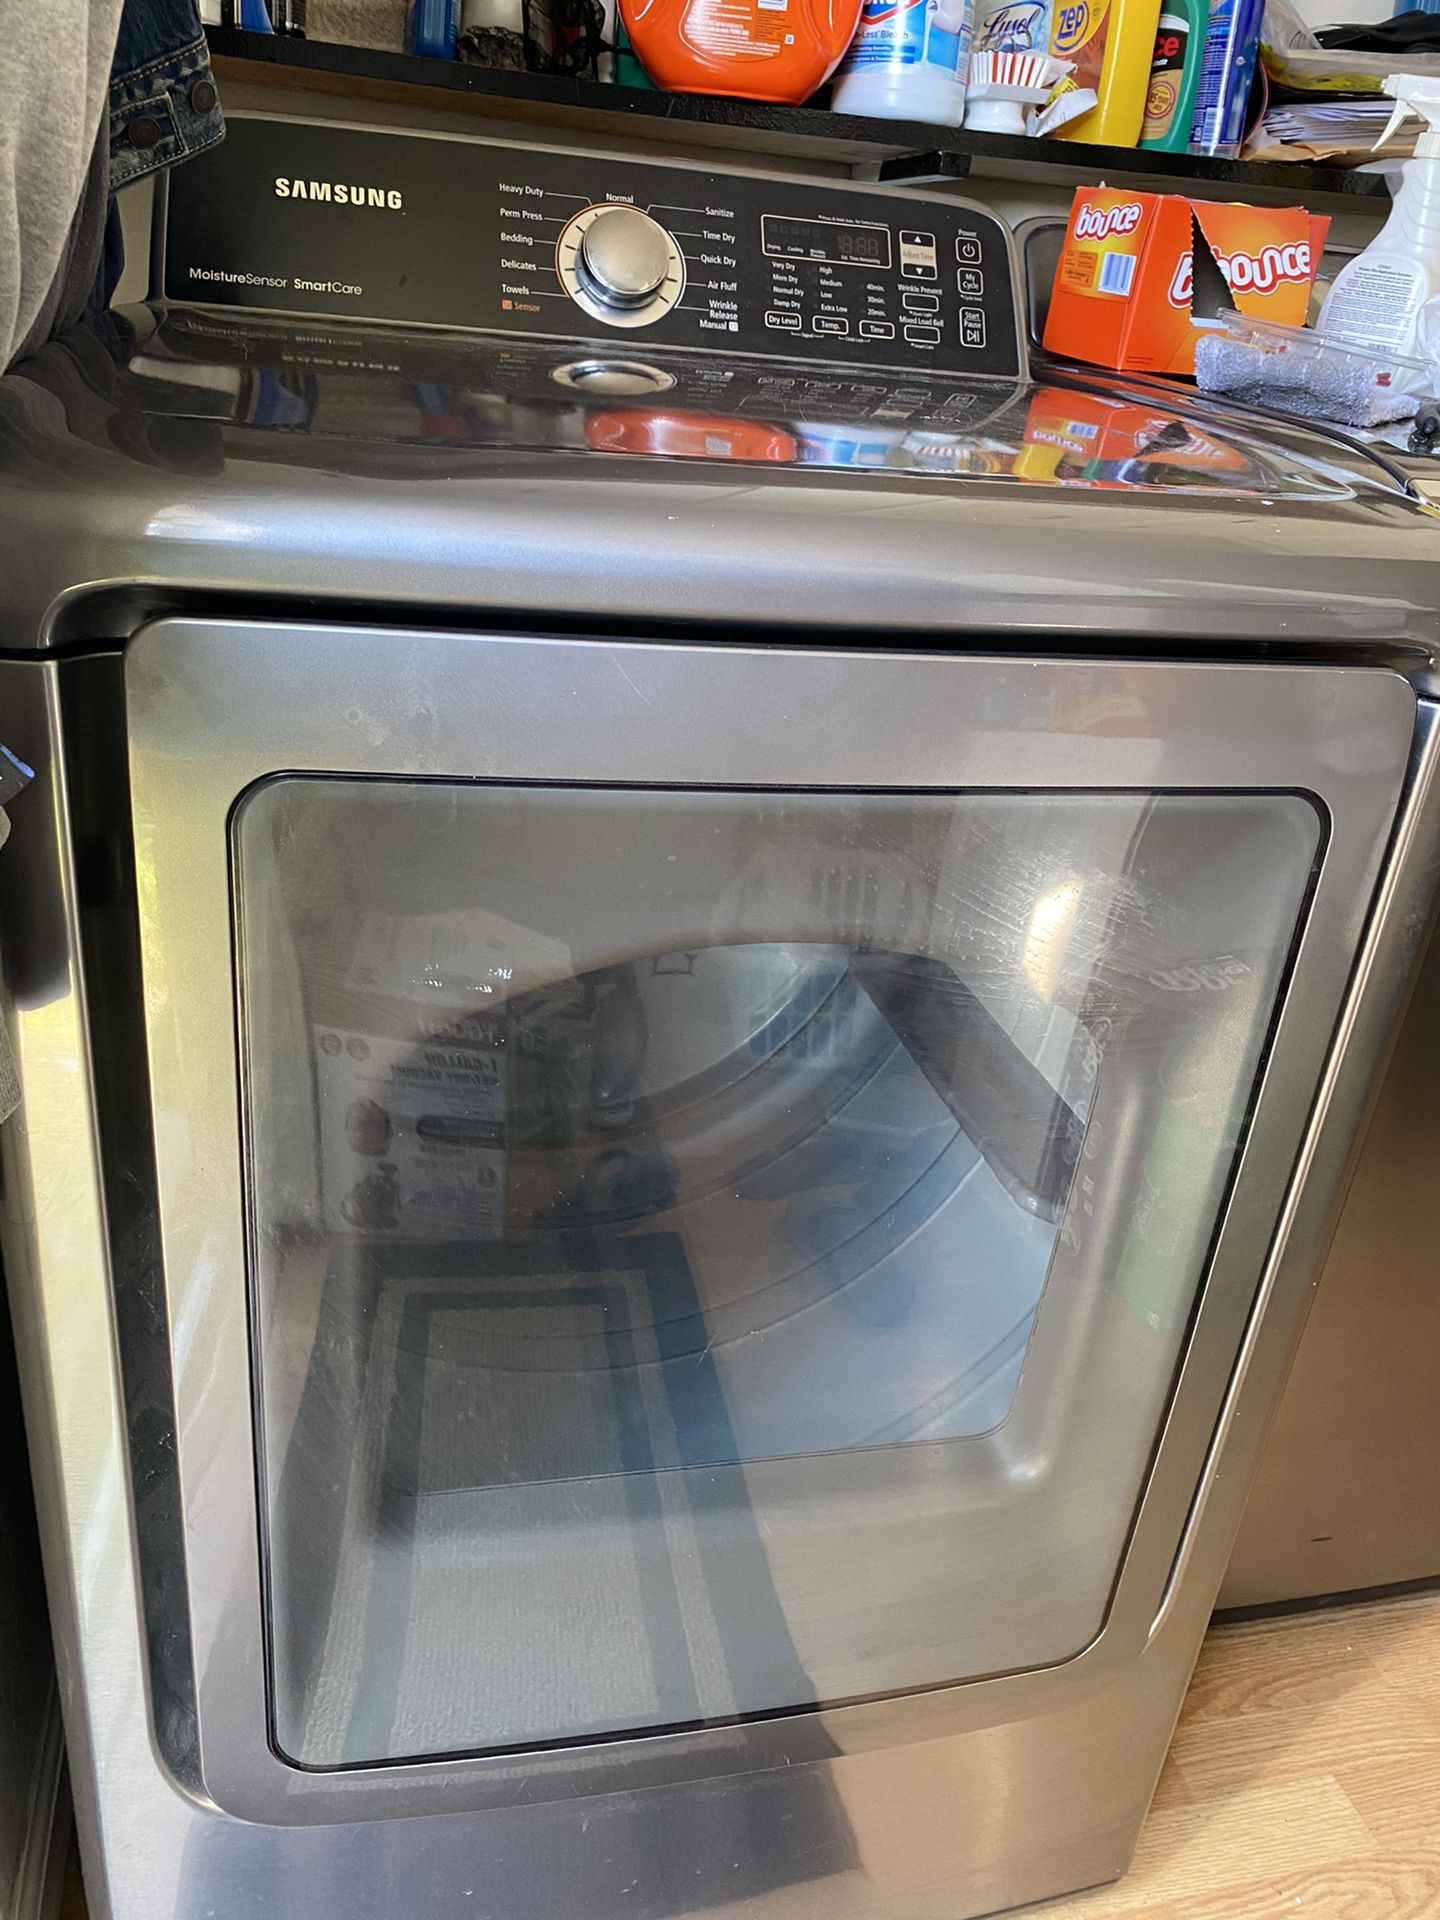 Samsung Electric Dryer 4 years old. (Does not heat)